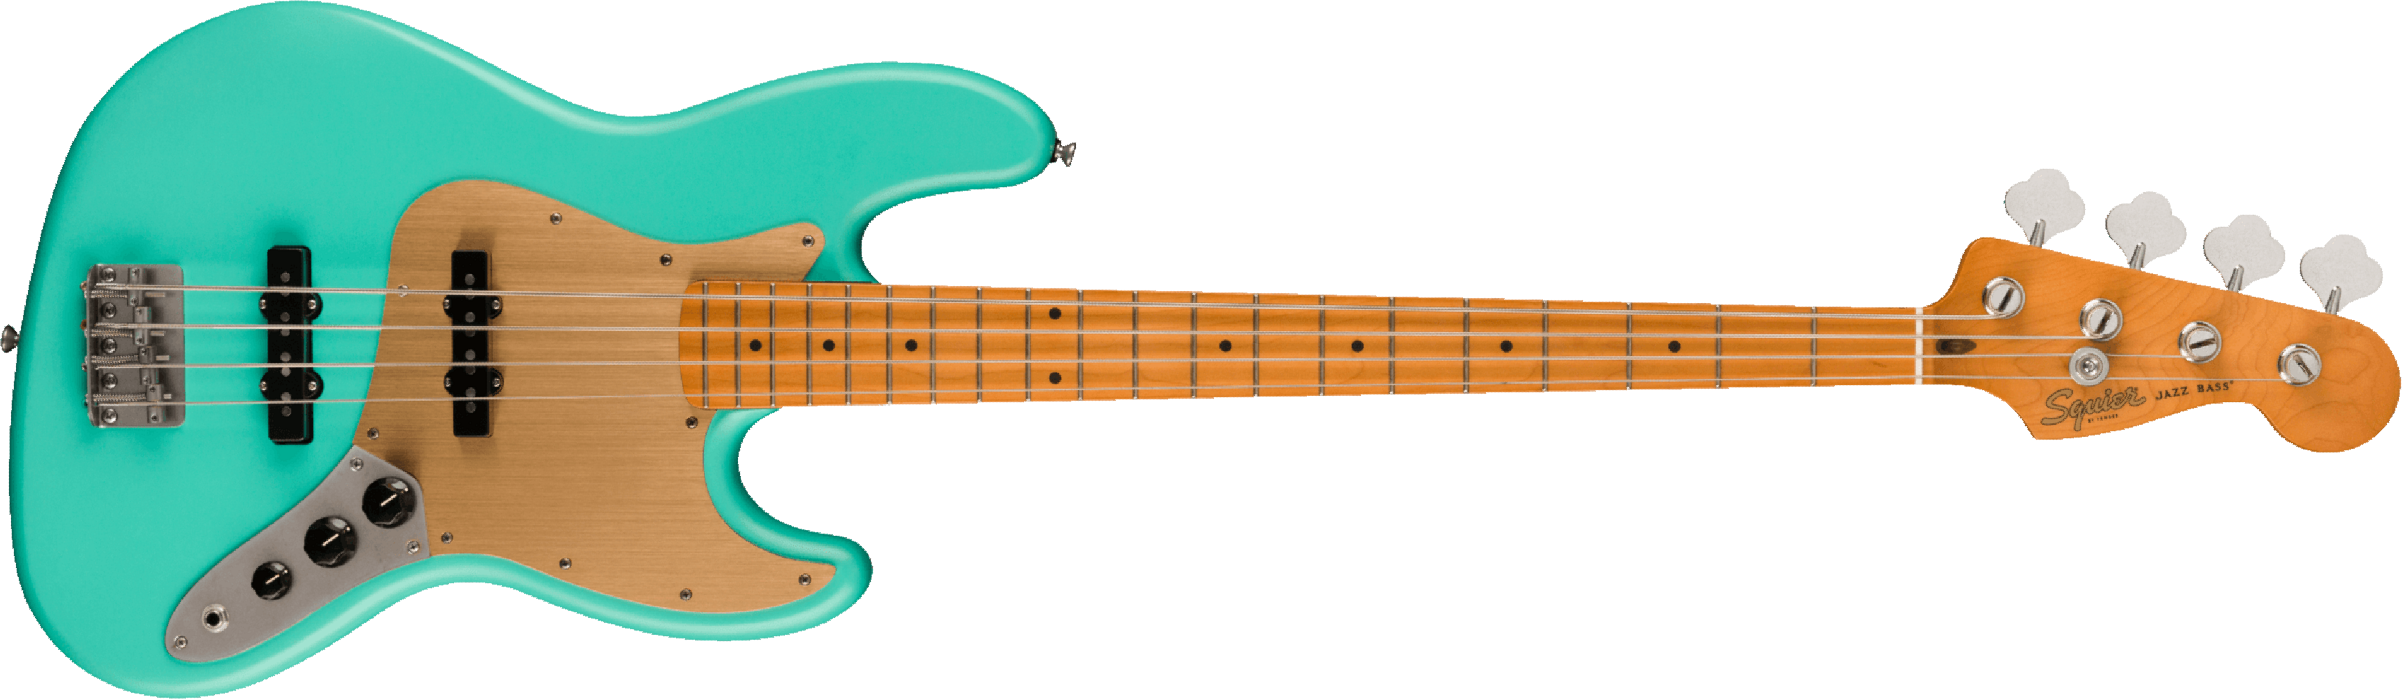 Squier Jazz Bass 40th Anniversary Gold Edition Mn - Satin Seafoam Green - Solid body electric bass - Main picture